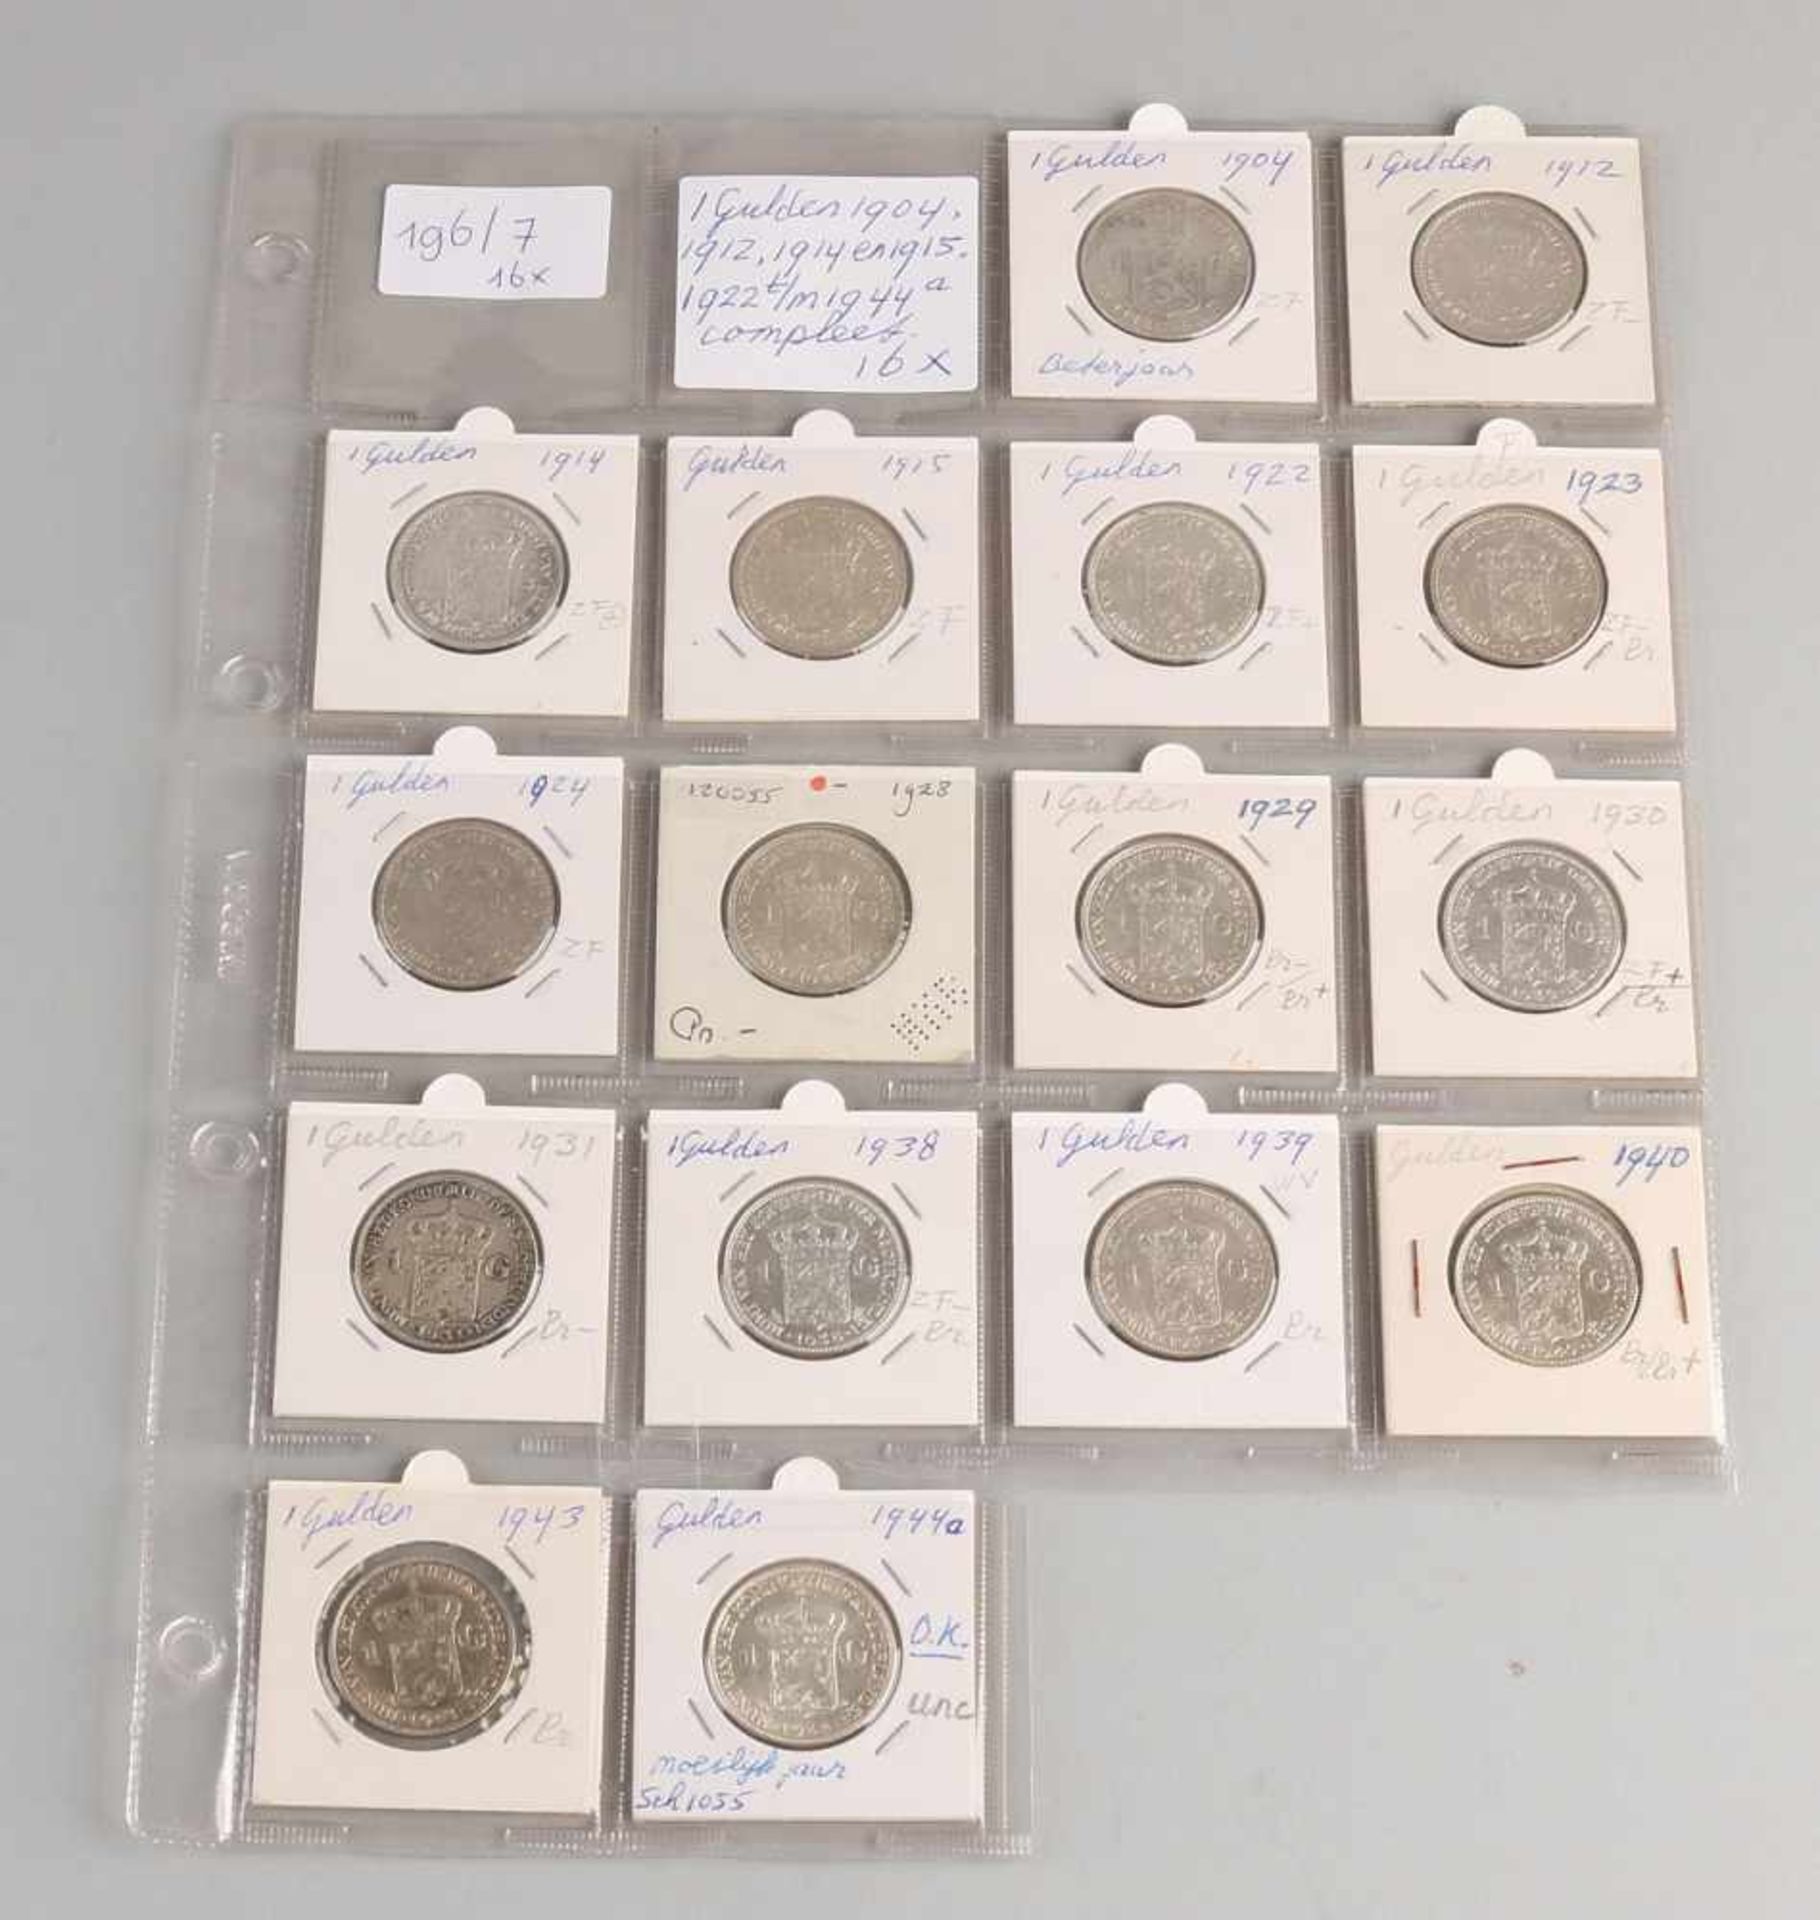 16x Silver guilders. 1904, 1912, 1914, 1915 and 1922 t / m 1944. Complete. In good condition.